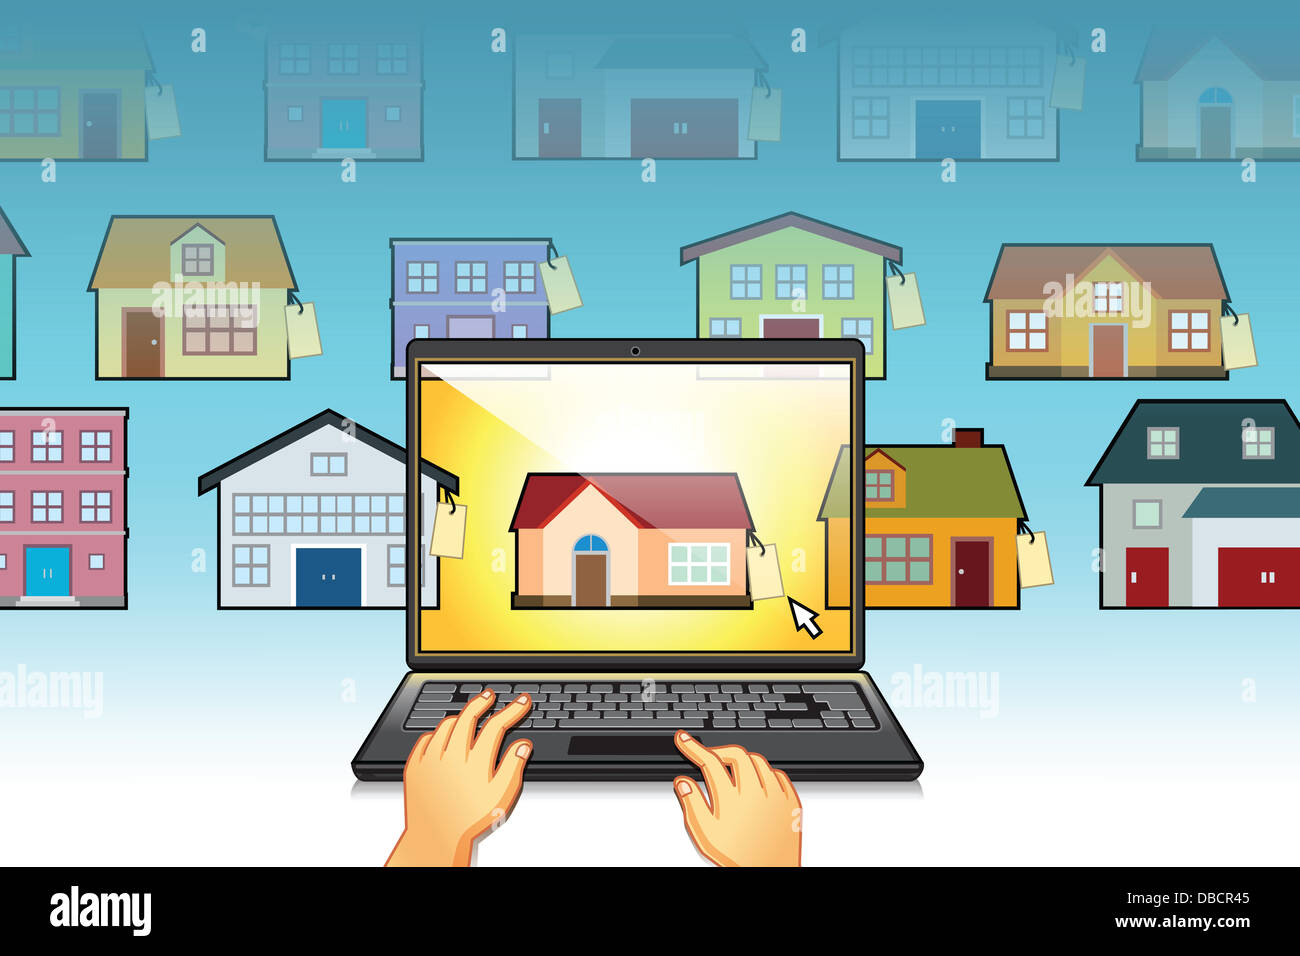 Illustration of hands using laptop with house model on screen representing online house hunting Stock Photo